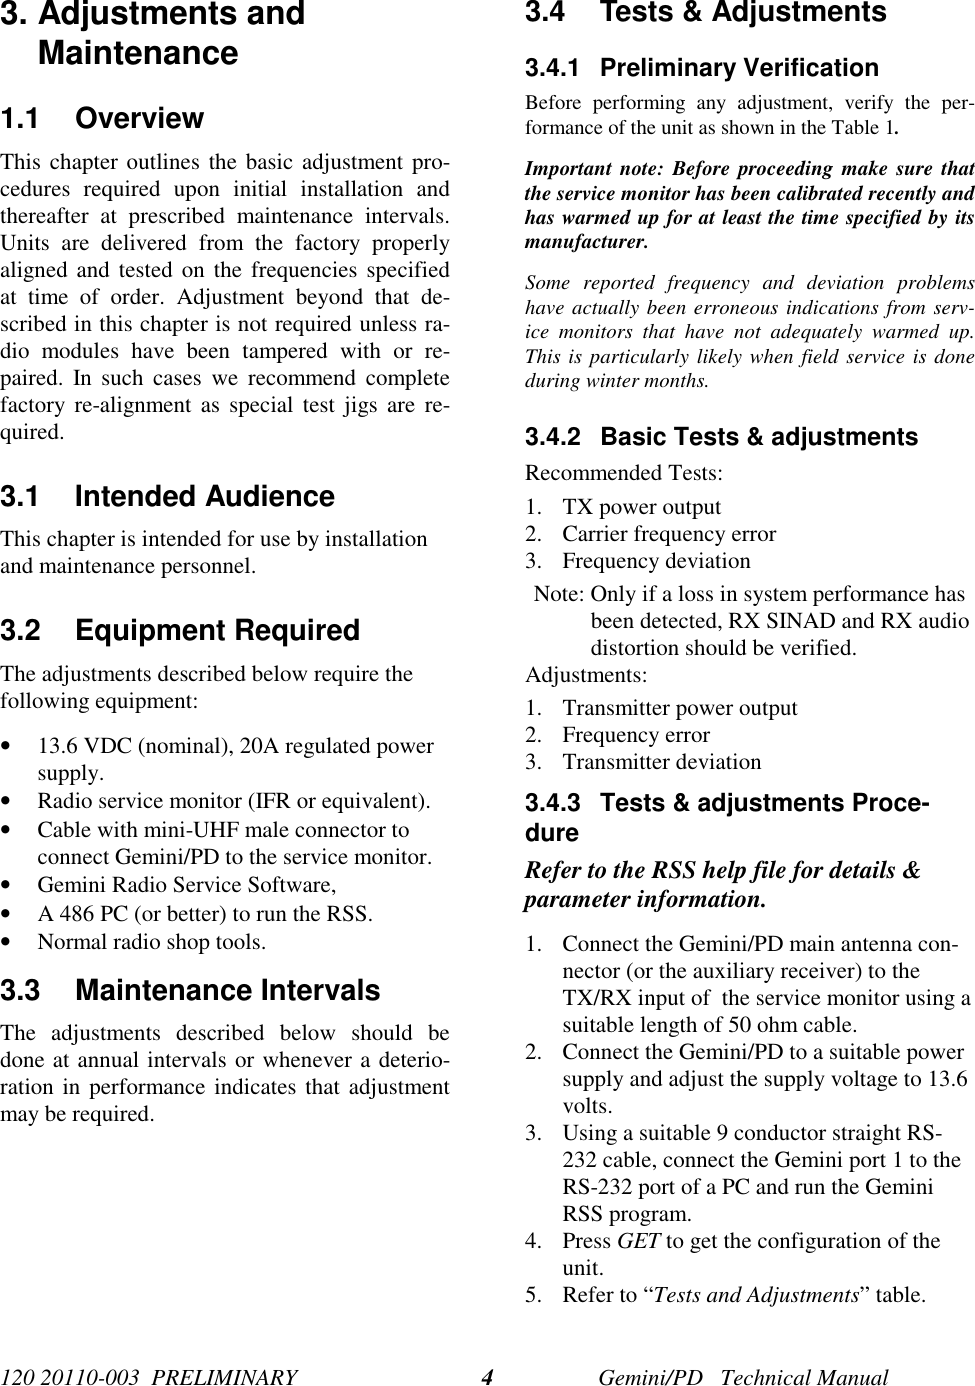 120 20110-003  PRELIMINARY Gemini/PD   Technical Manual43. Adjustments andMaintenance1.1 OverviewThis chapter outlines the basic adjustment pro-cedures required upon initial installation andthereafter at prescribed maintenance intervals.Units are delivered from the factory properlyaligned and tested on the frequencies specifiedat time of order. Adjustment beyond that de-scribed in this chapter is not required unless ra-dio modules have been tampered with or re-paired. In such cases we recommend completefactory re-alignment as special test jigs are re-quired.3.1 Intended AudienceThis chapter is intended for use by installationand maintenance personnel.3.2 Equipment RequiredThe adjustments described below require thefollowing equipment:• 13.6 VDC (nominal), 20A regulated powersupply.• Radio service monitor (IFR or equivalent).• Cable with mini-UHF male connector toconnect Gemini/PD to the service monitor.• Gemini Radio Service Software,• A 486 PC (or better) to run the RSS.• Normal radio shop tools.3.3 Maintenance IntervalsThe adjustments described below should bedone at annual intervals or whenever a deterio-ration in performance indicates that adjustmentmay be required.3.4  Tests &amp; Adjustments3.4.1 Preliminary VerificationBefore performing any adjustment, verify the per-formance of the unit as shown in the Table 1.Important note: Before proceeding make sure thatthe service monitor has been calibrated recently andhas warmed up for at least the time specified by itsmanufacturer.Some reported frequency and deviation problemshave actually been erroneous indications from serv-ice monitors that have not adequately warmed up.This is particularly likely when field service is doneduring winter months.3.4.2  Basic Tests &amp; adjustmentsRecommended Tests:1. TX power output2. Carrier frequency error3. Frequency deviationNote: Only if a loss in system performance hasbeen detected, RX SINAD and RX audiodistortion should be verified.Adjustments:1. Transmitter power output2. Frequency error3. Transmitter deviation3.4.3  Tests &amp; adjustments Proce-dureRefer to the RSS help file for details &amp;parameter information.1. Connect the Gemini/PD main antenna con-nector (or the auxiliary receiver) to theTX/RX input of  the service monitor using asuitable length of 50 ohm cable.2. Connect the Gemini/PD to a suitable powersupply and adjust the supply voltage to 13.6volts.3. Using a suitable 9 conductor straight RS-232 cable, connect the Gemini port 1 to theRS-232 port of a PC and run the GeminiRSS program.4. Press GET to get the configuration of theunit.5. Refer to “Tests and Adjustments” table.